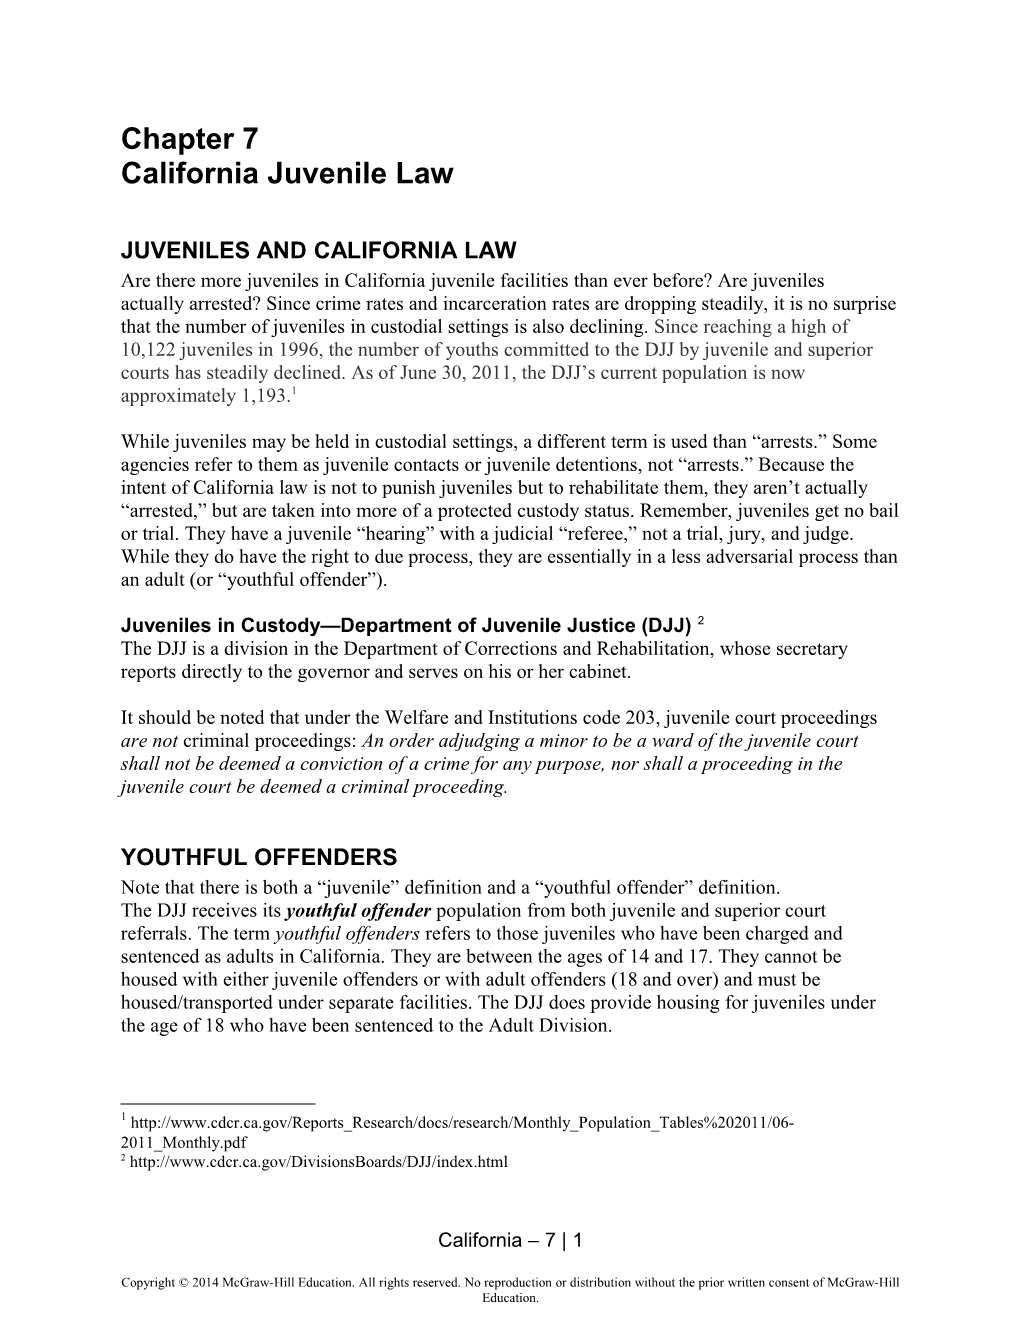 Juveniles and California Law